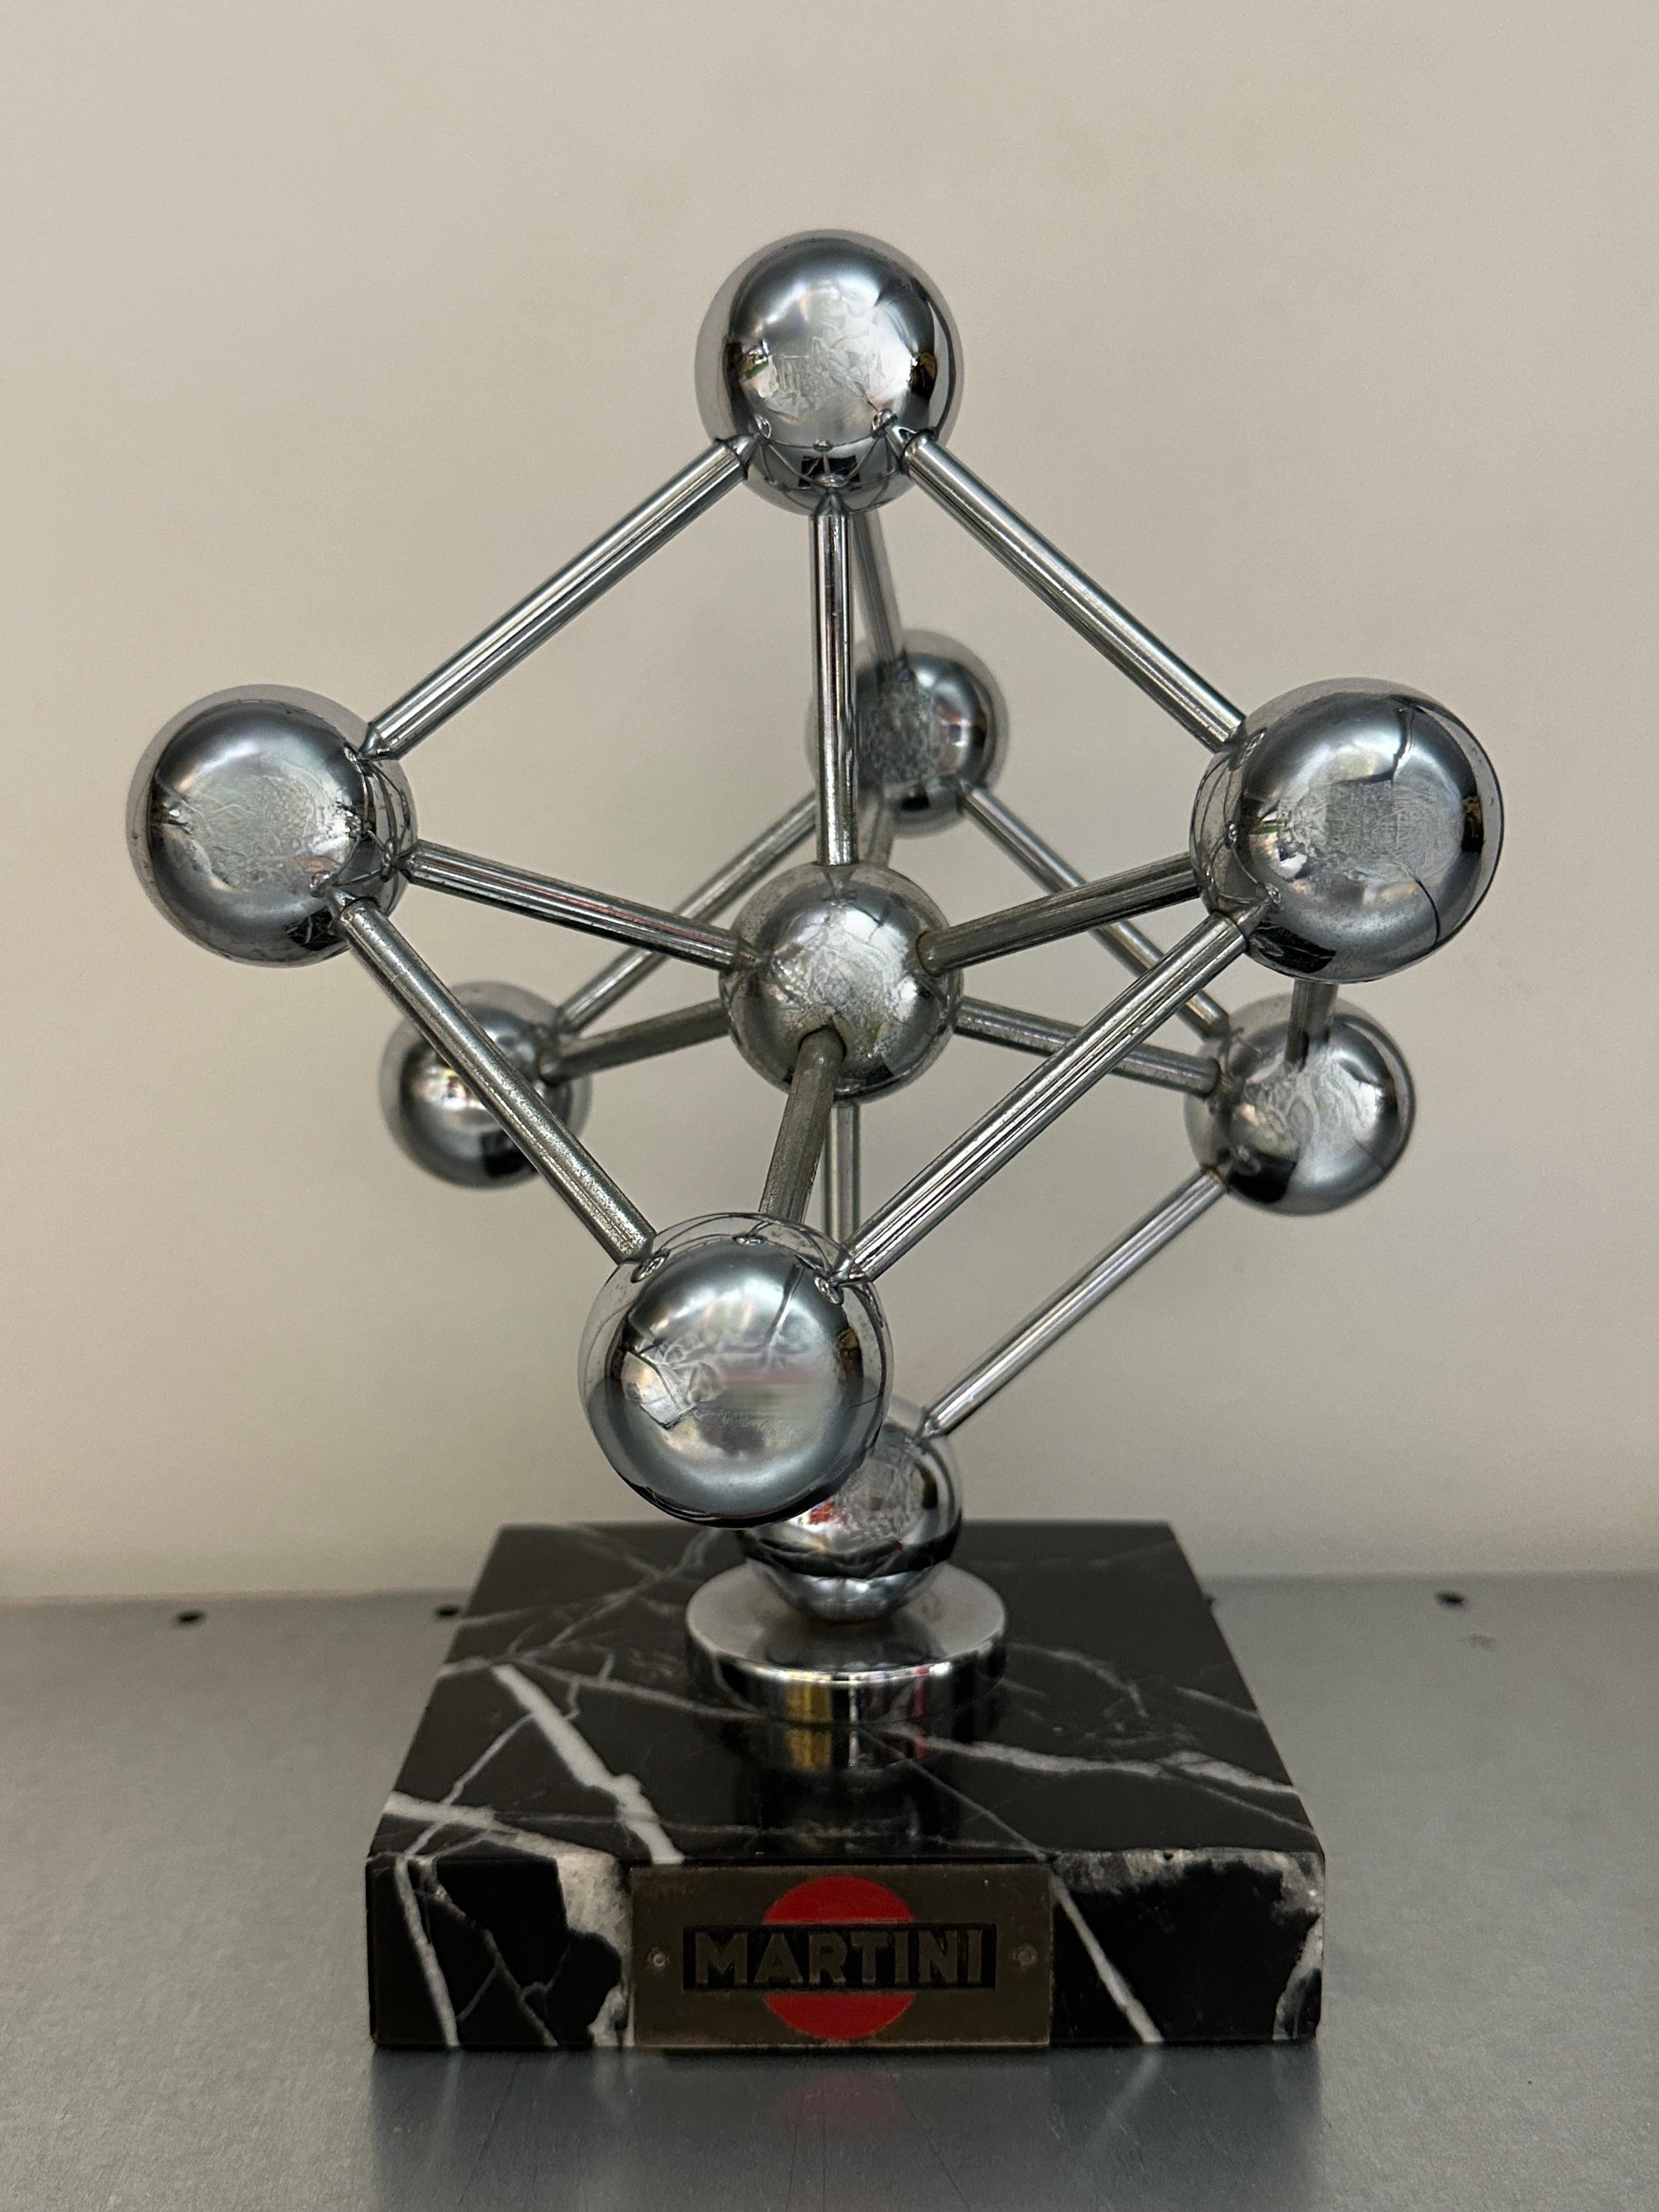 A decorative souvenir building sculpture. The Atomium is a landmark building in Brussels, Belgium, originally constructed for the 1958 Brussels World's Fair (Expo '58). This on is a large scale Martini Advertising Give Away. Very hard to find and